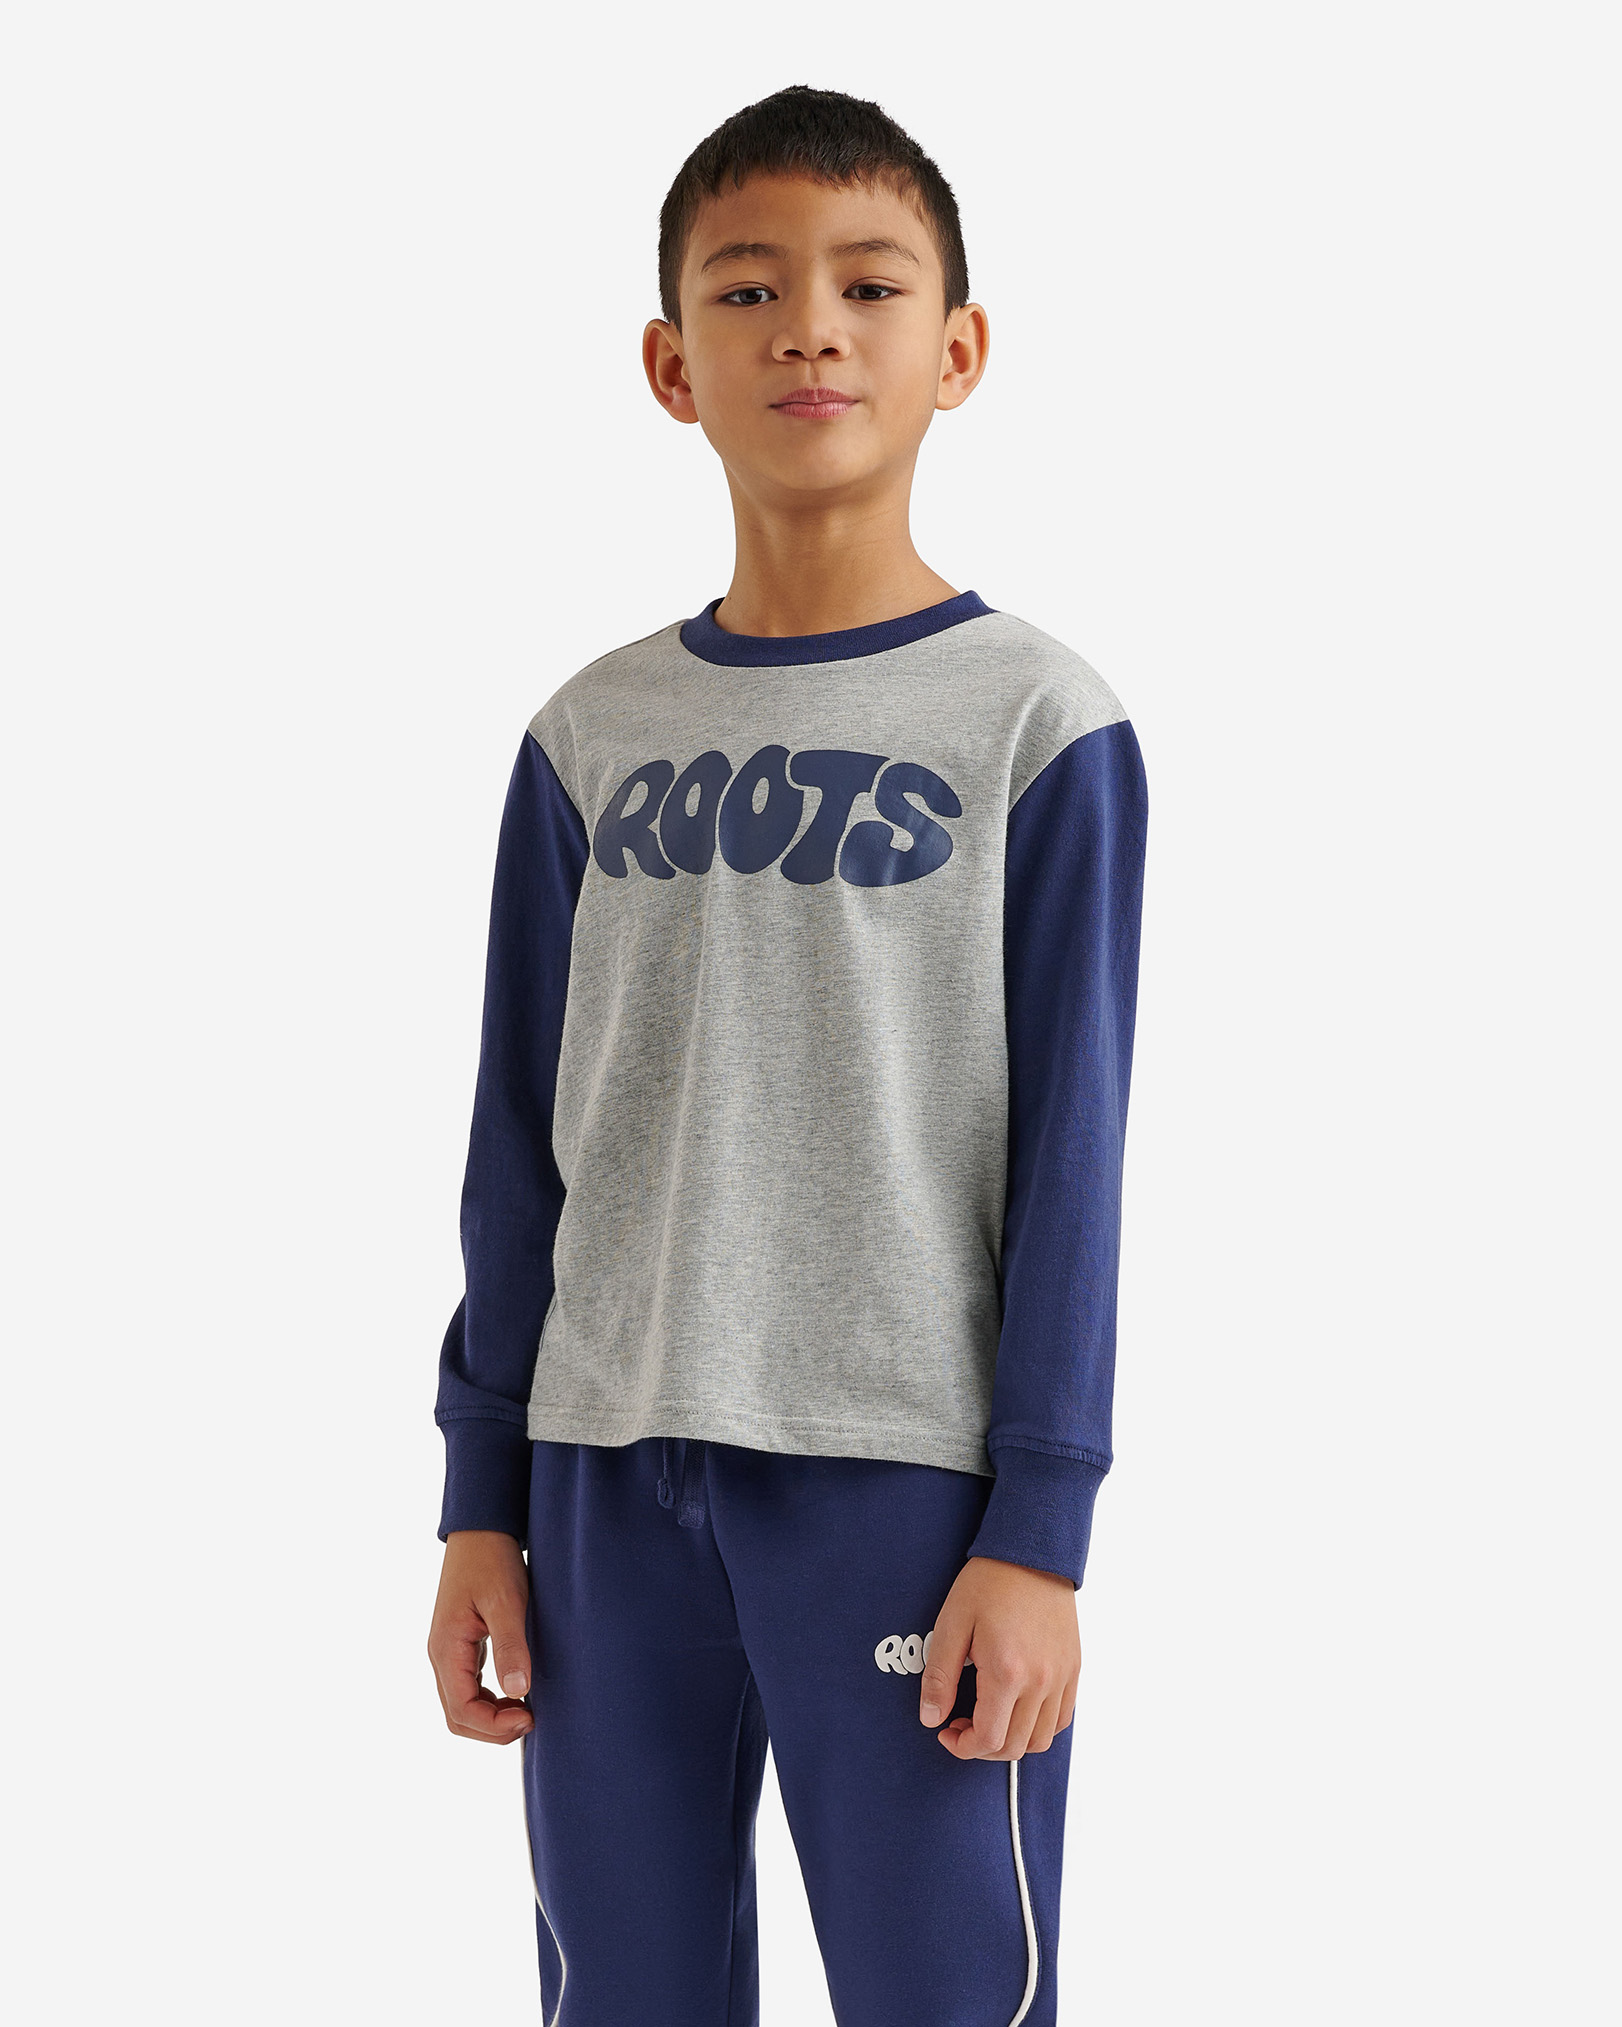 Roots Kids Active T-Shirt in Grey Mix